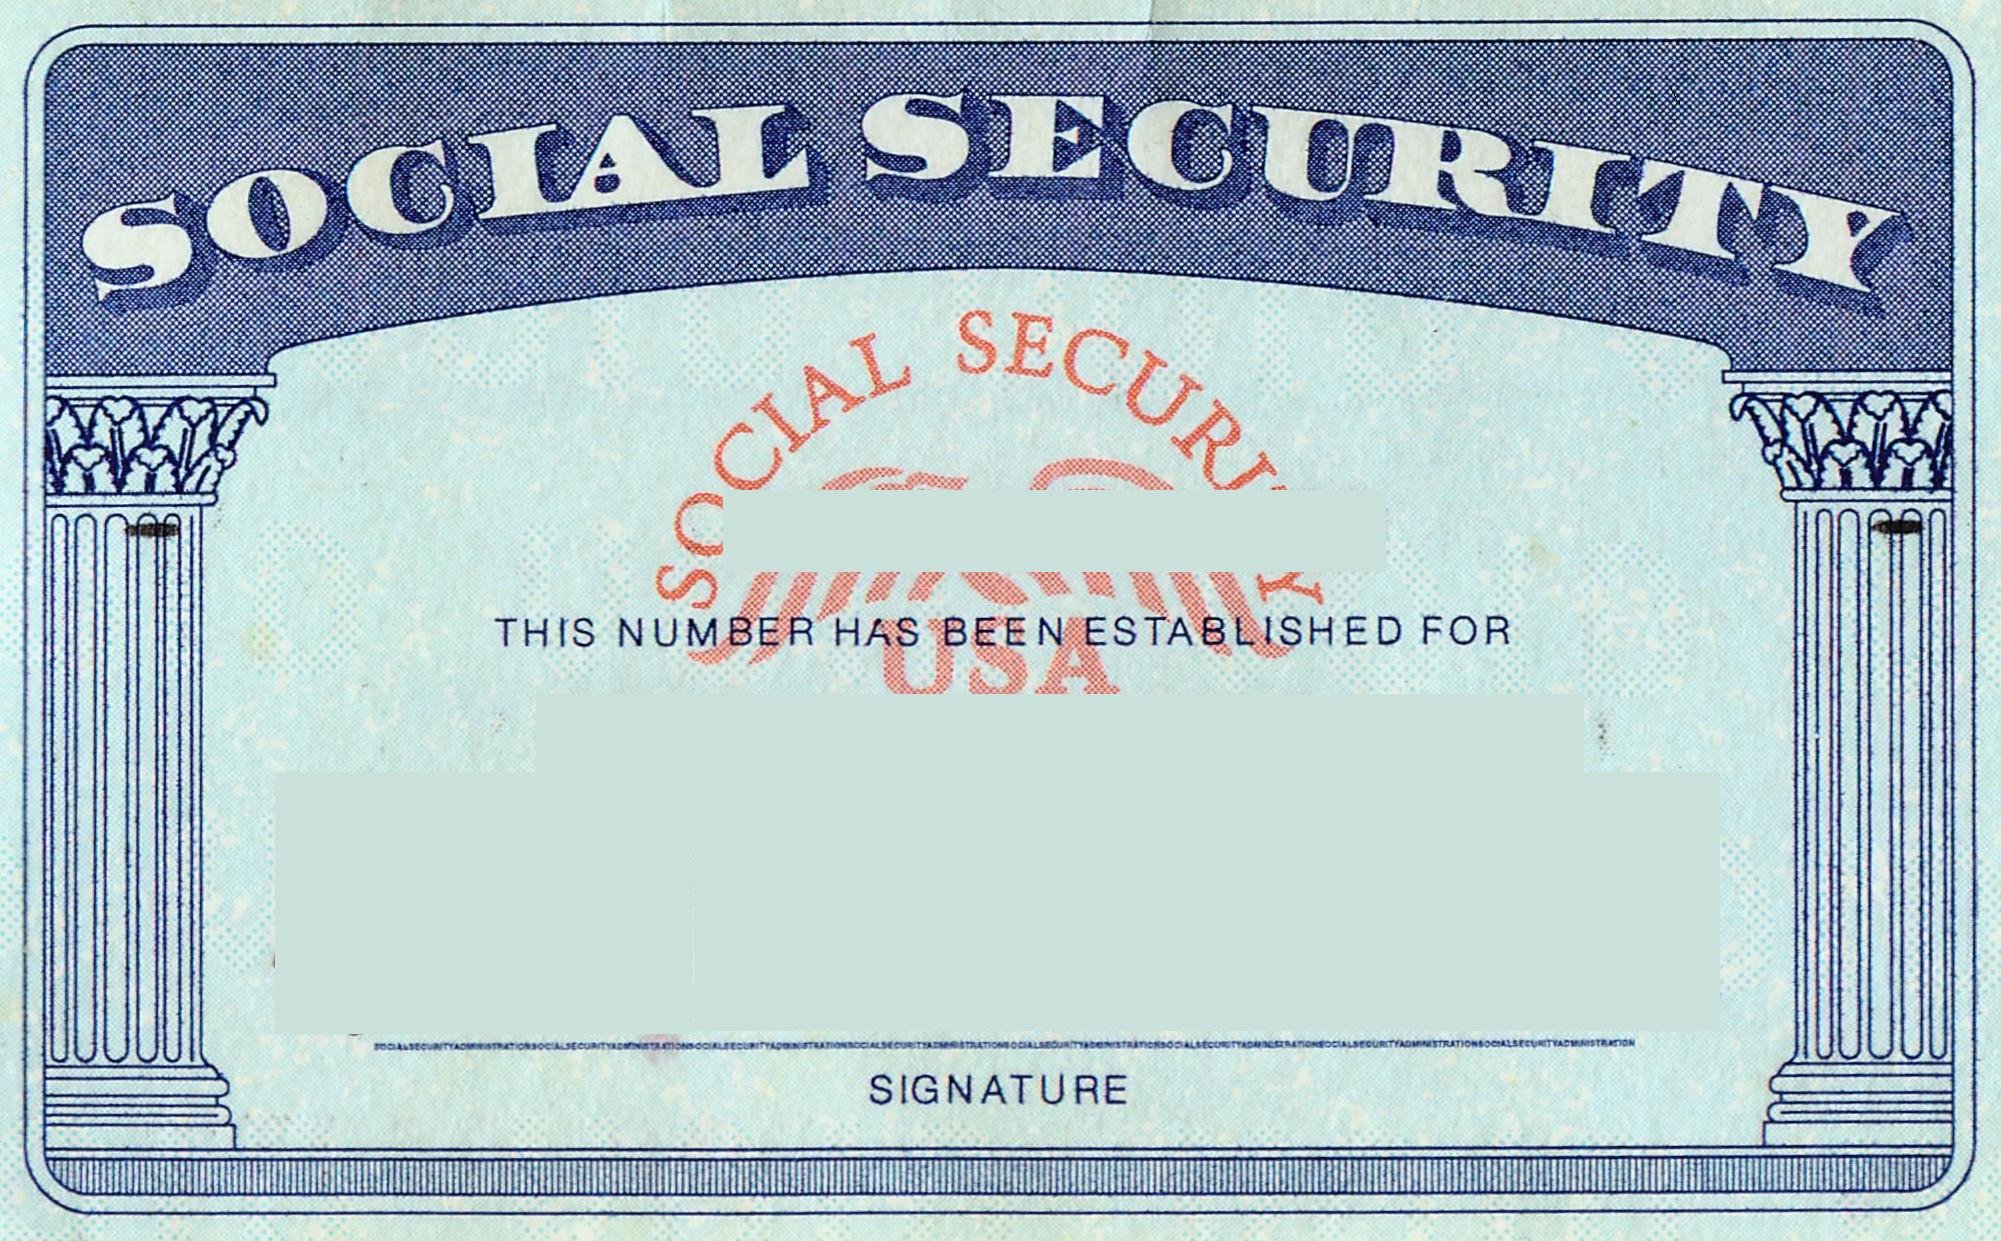 Image of a blank social security card